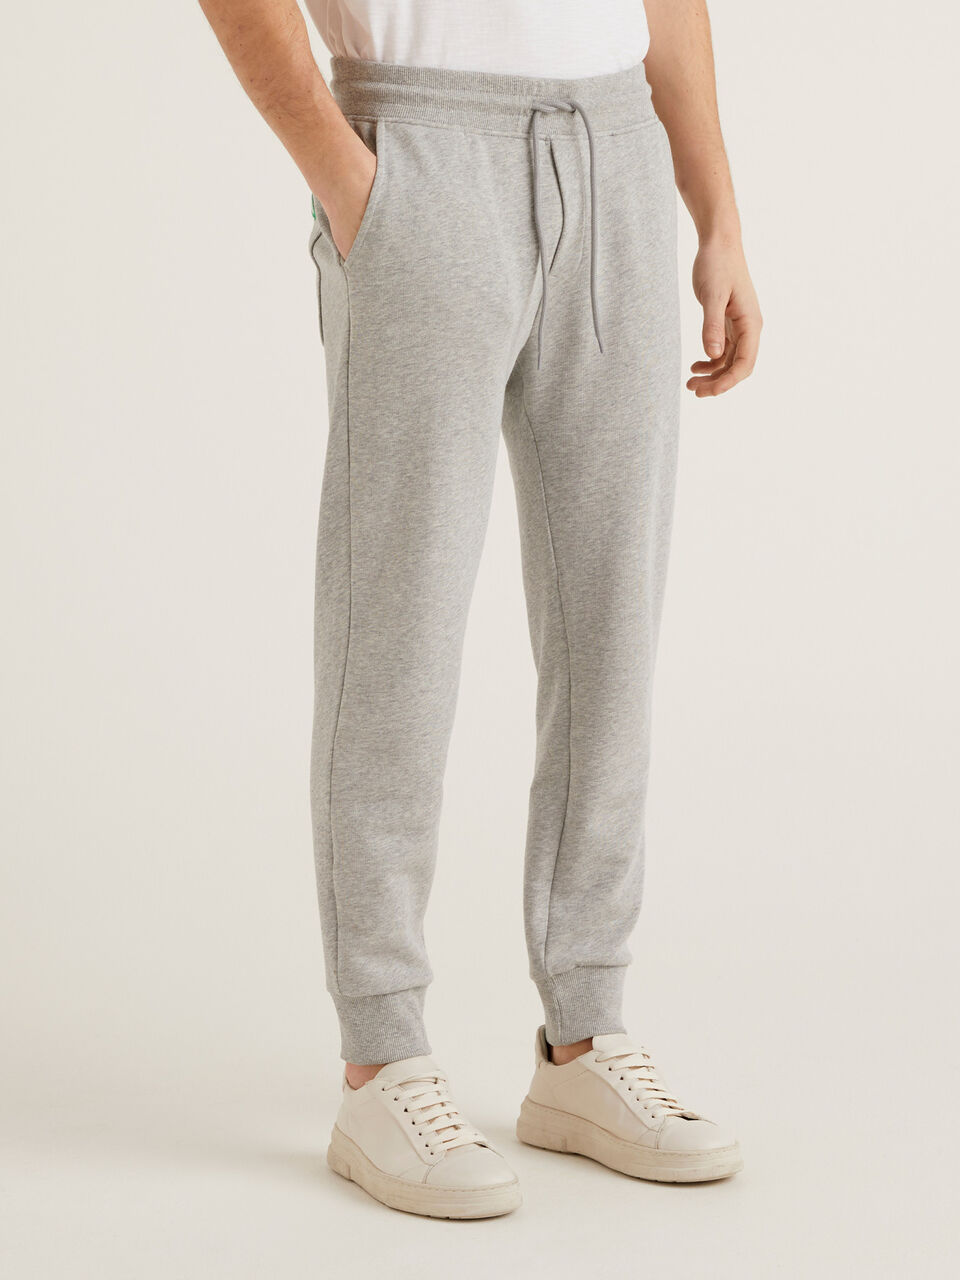 Sweat joggers in 100% cotton - Gray